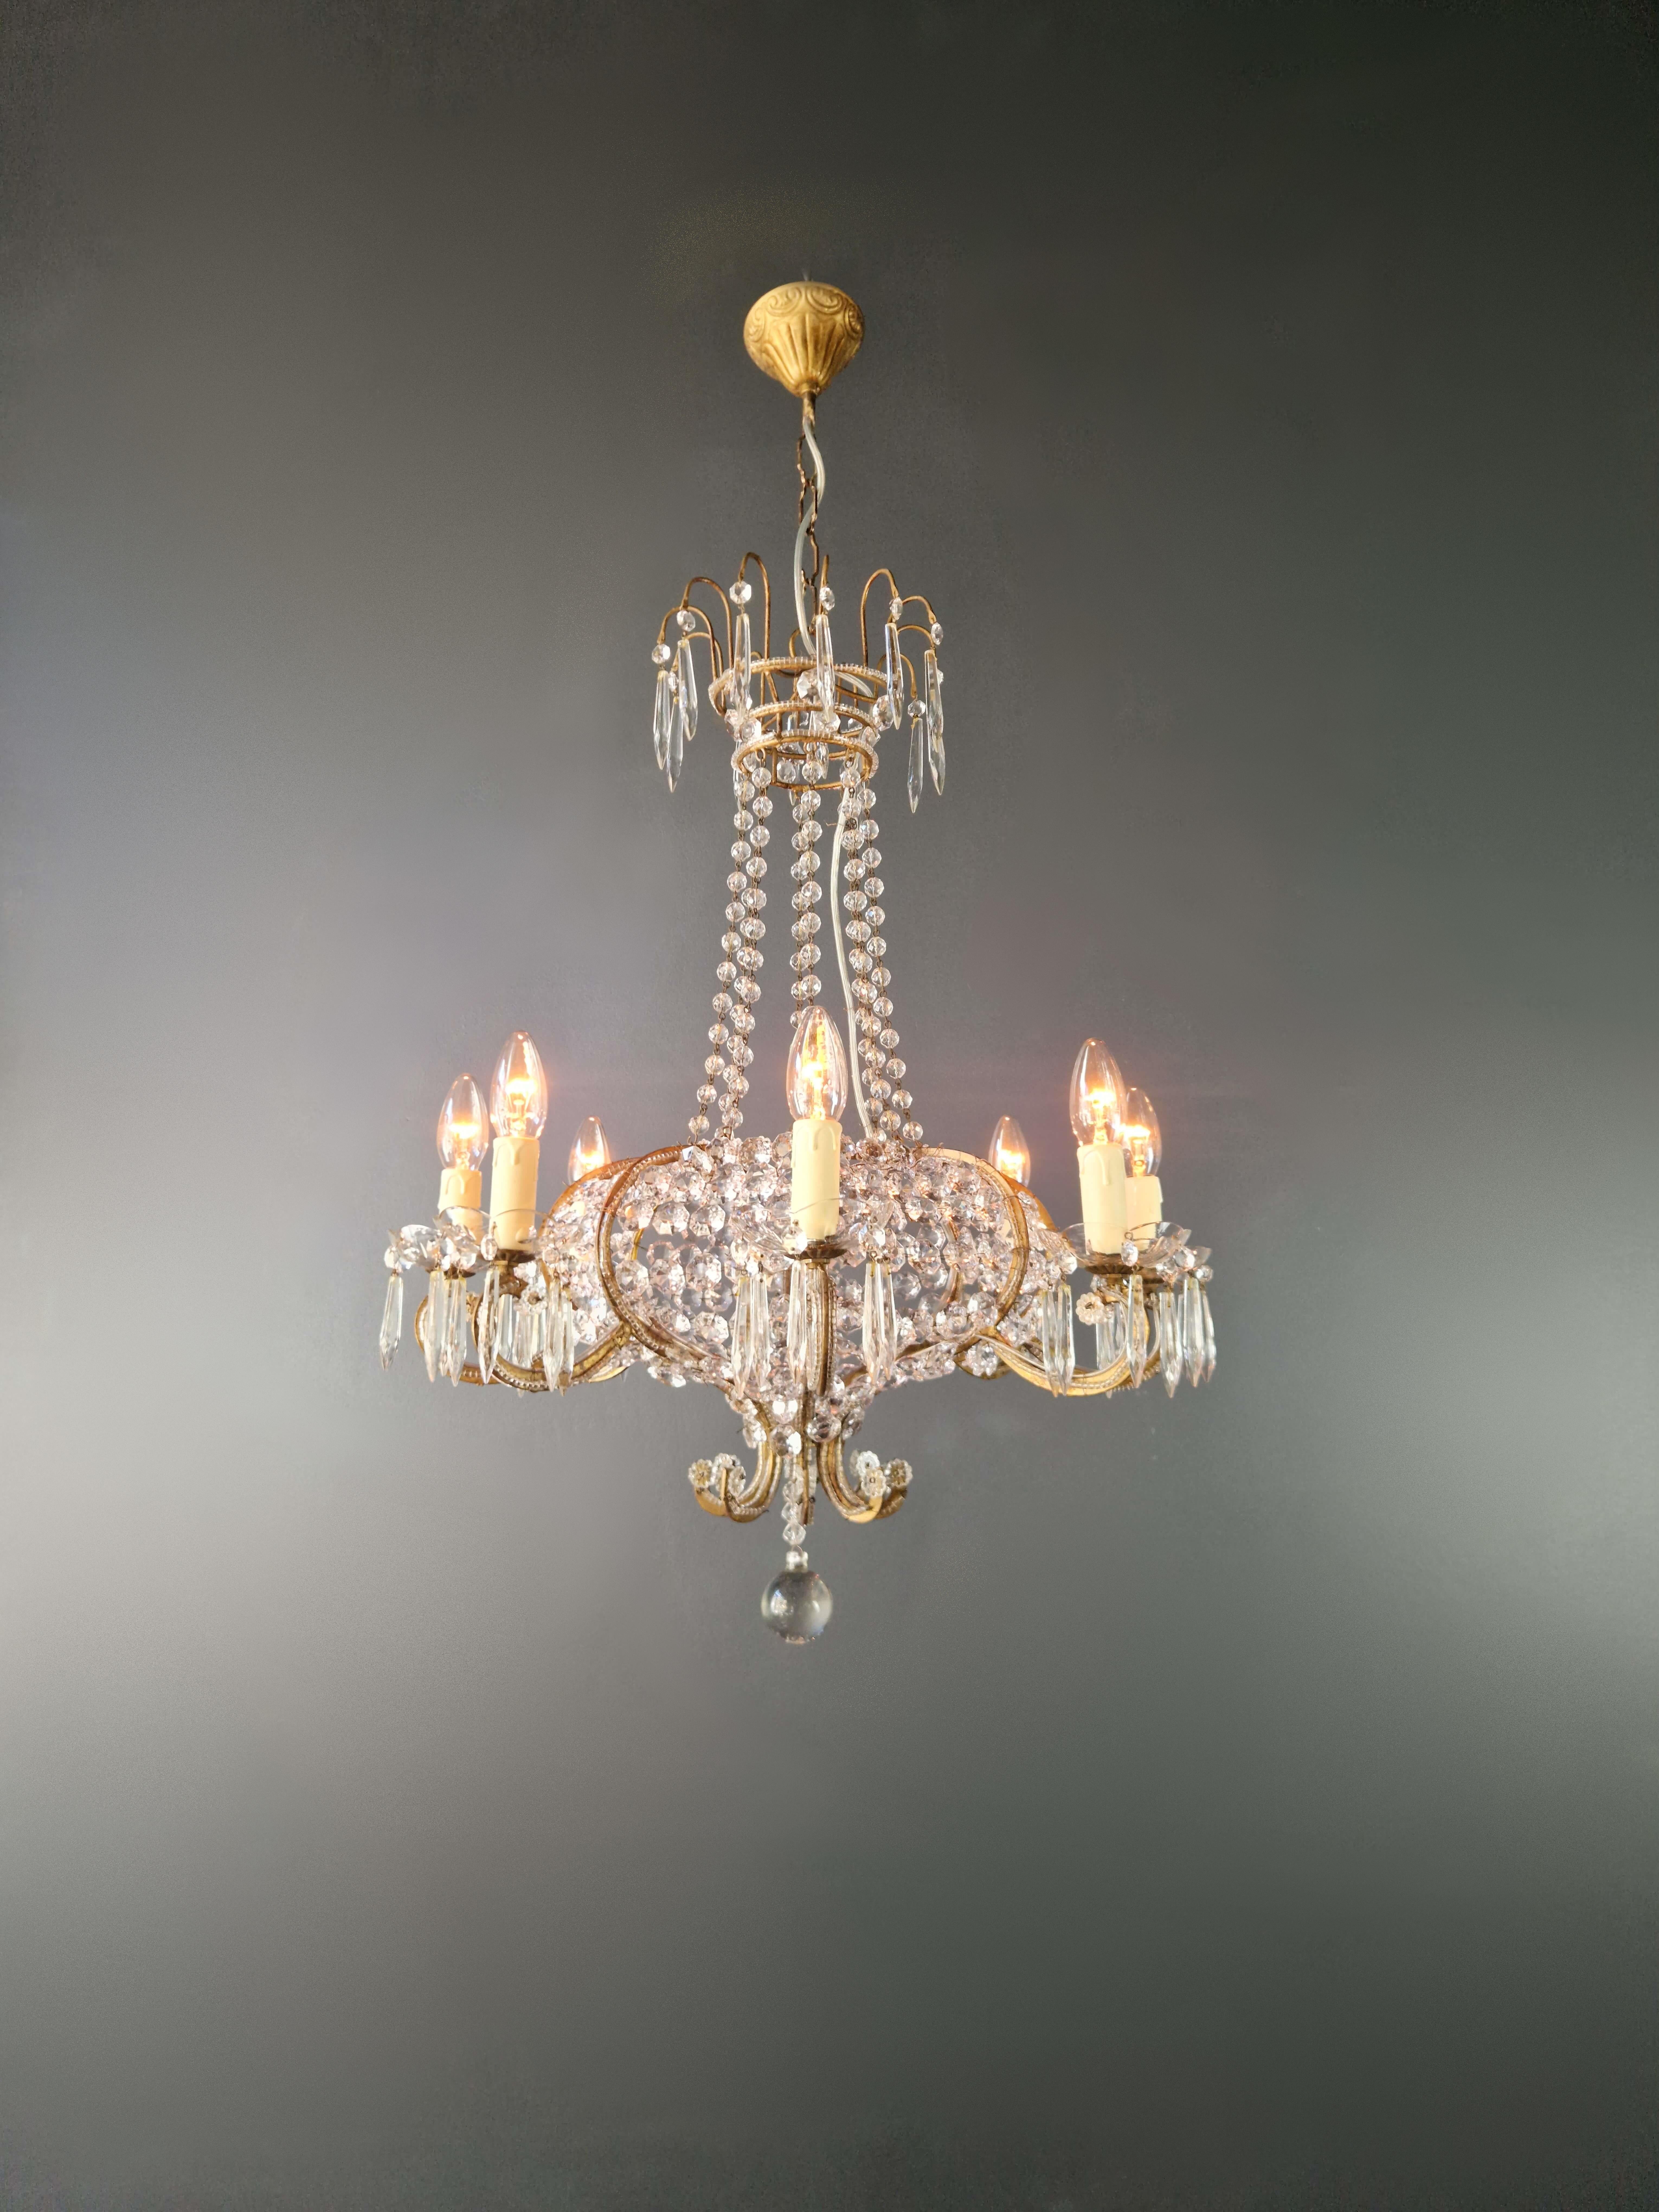 Introducing our exquisite antique crystal chandelier, a masterpiece that embodies the elegance of France.

With a height of 74 cm and a diameter of 60 cm, this chandelier exudes timeless charm. It weighs approximately 6kg and has 8 E14 bulb holders